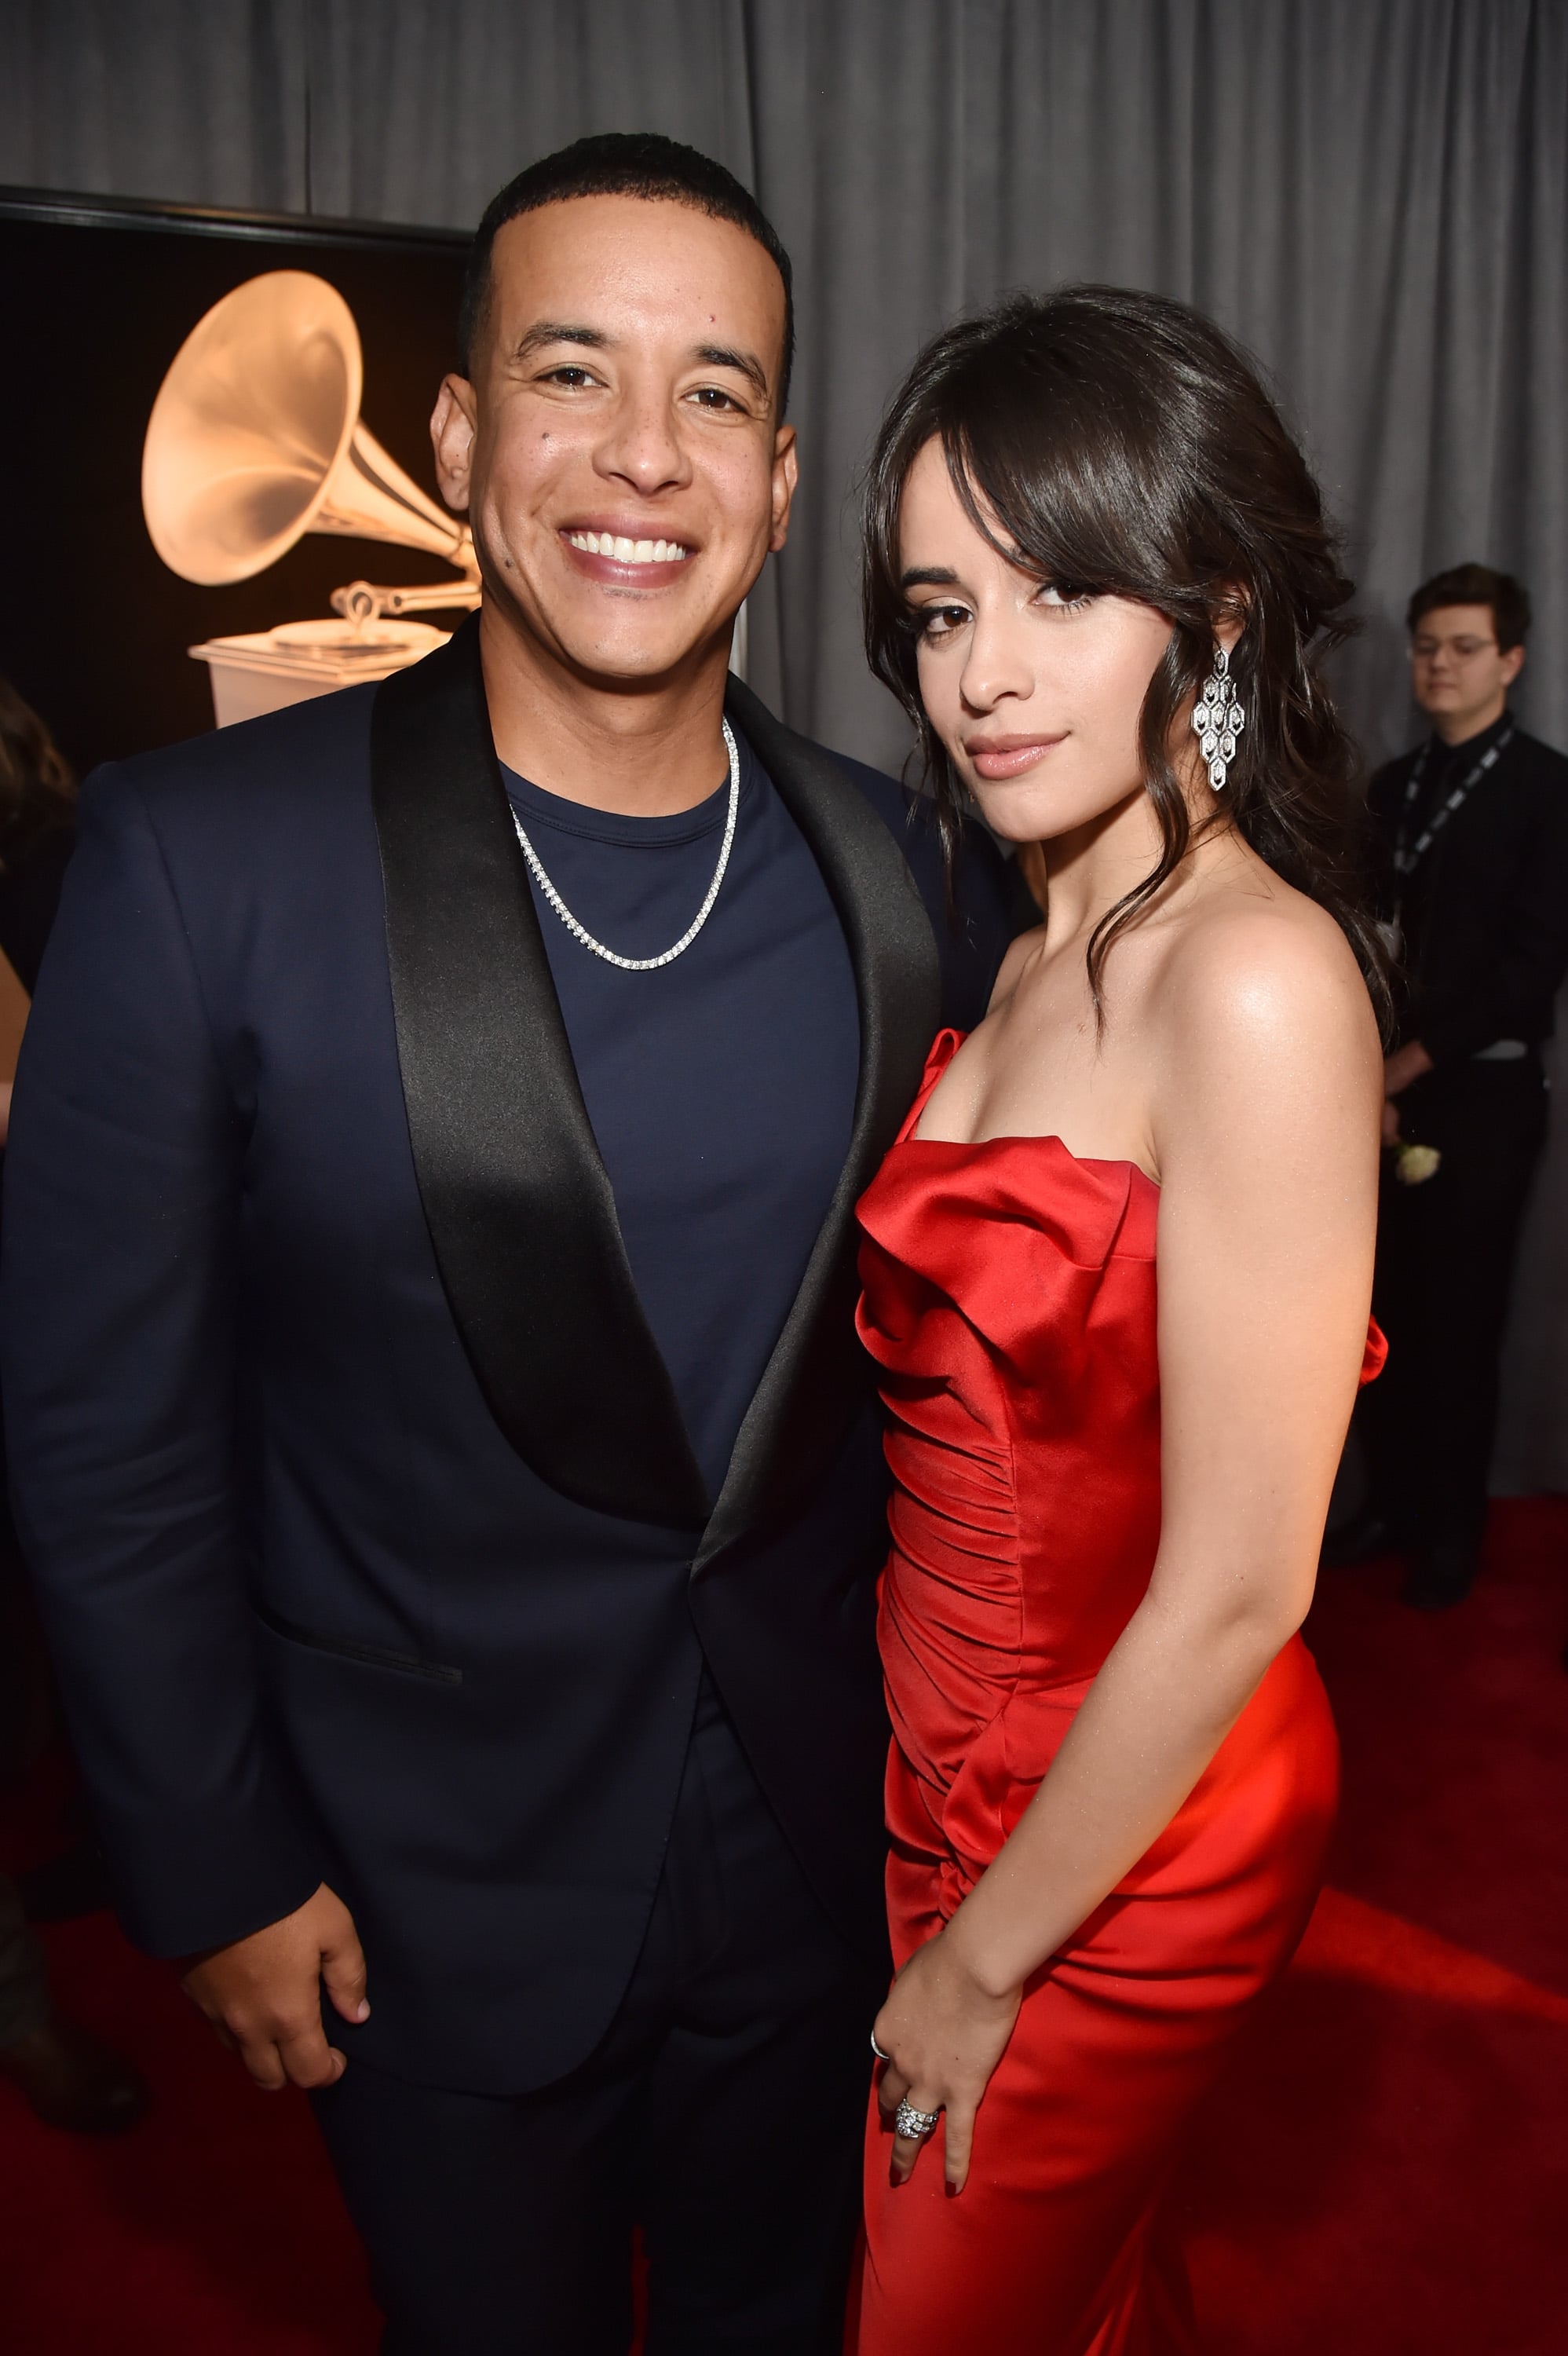 In 2018, Daddy Yankee and Camila Cabello struck a pose together on the red carpet.